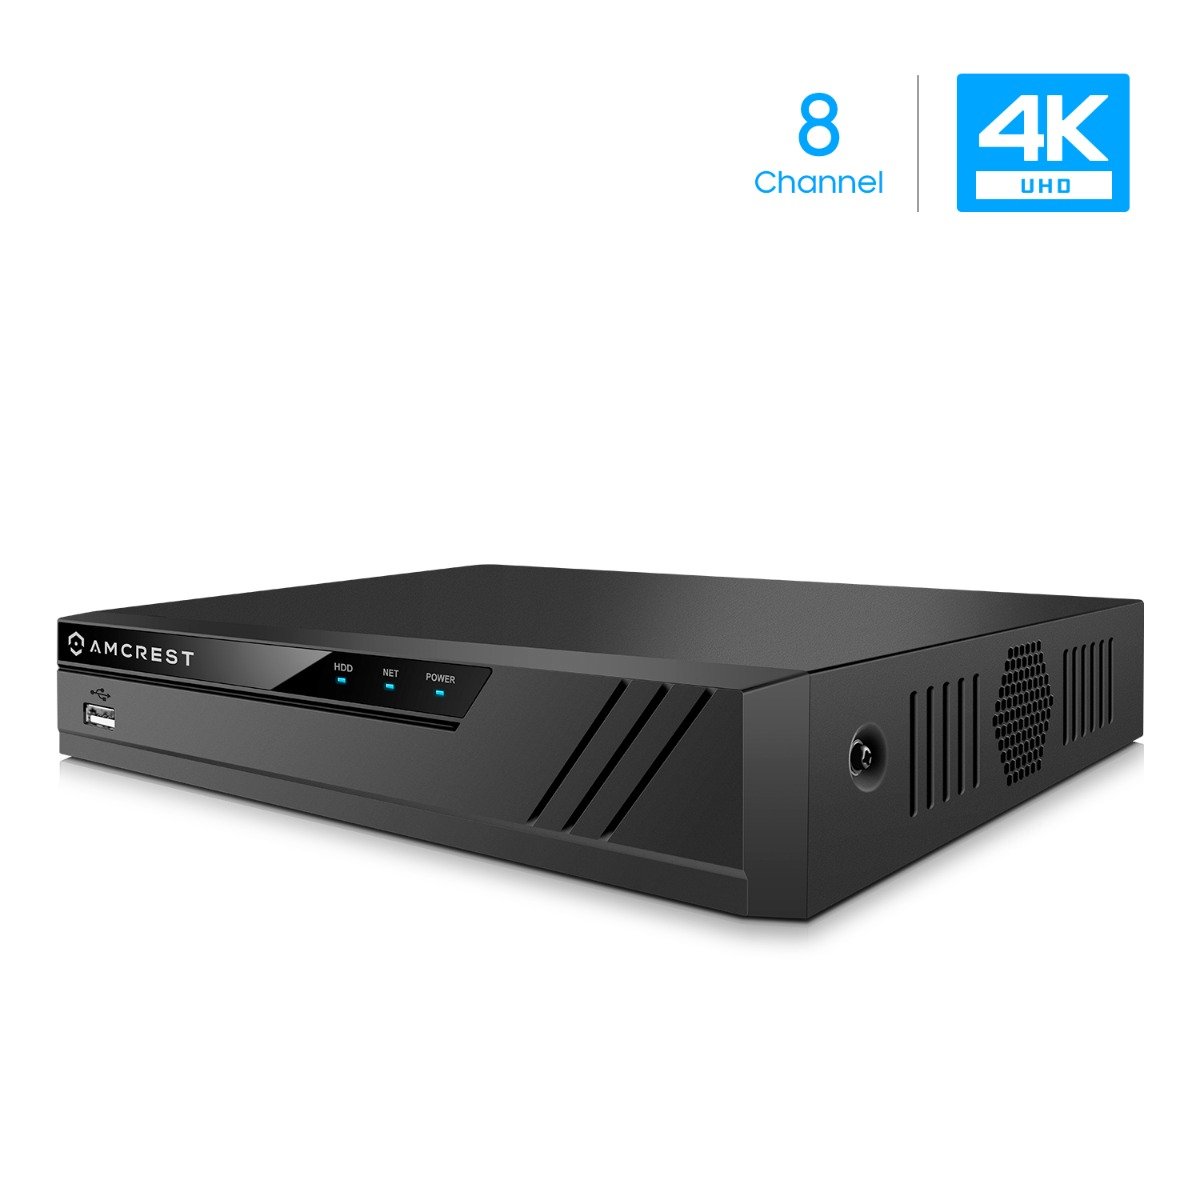 Supports up to 6TB HDD Amcrest NV4108-HS 4K 8CH NVR 1080p/3MP/4MP/5MP/6MP/8MP 2020 Version Not Included IP Cameras @30fps No Built-in WiFi Supports up to 8 x 4K Network Video Recorder 8MP 